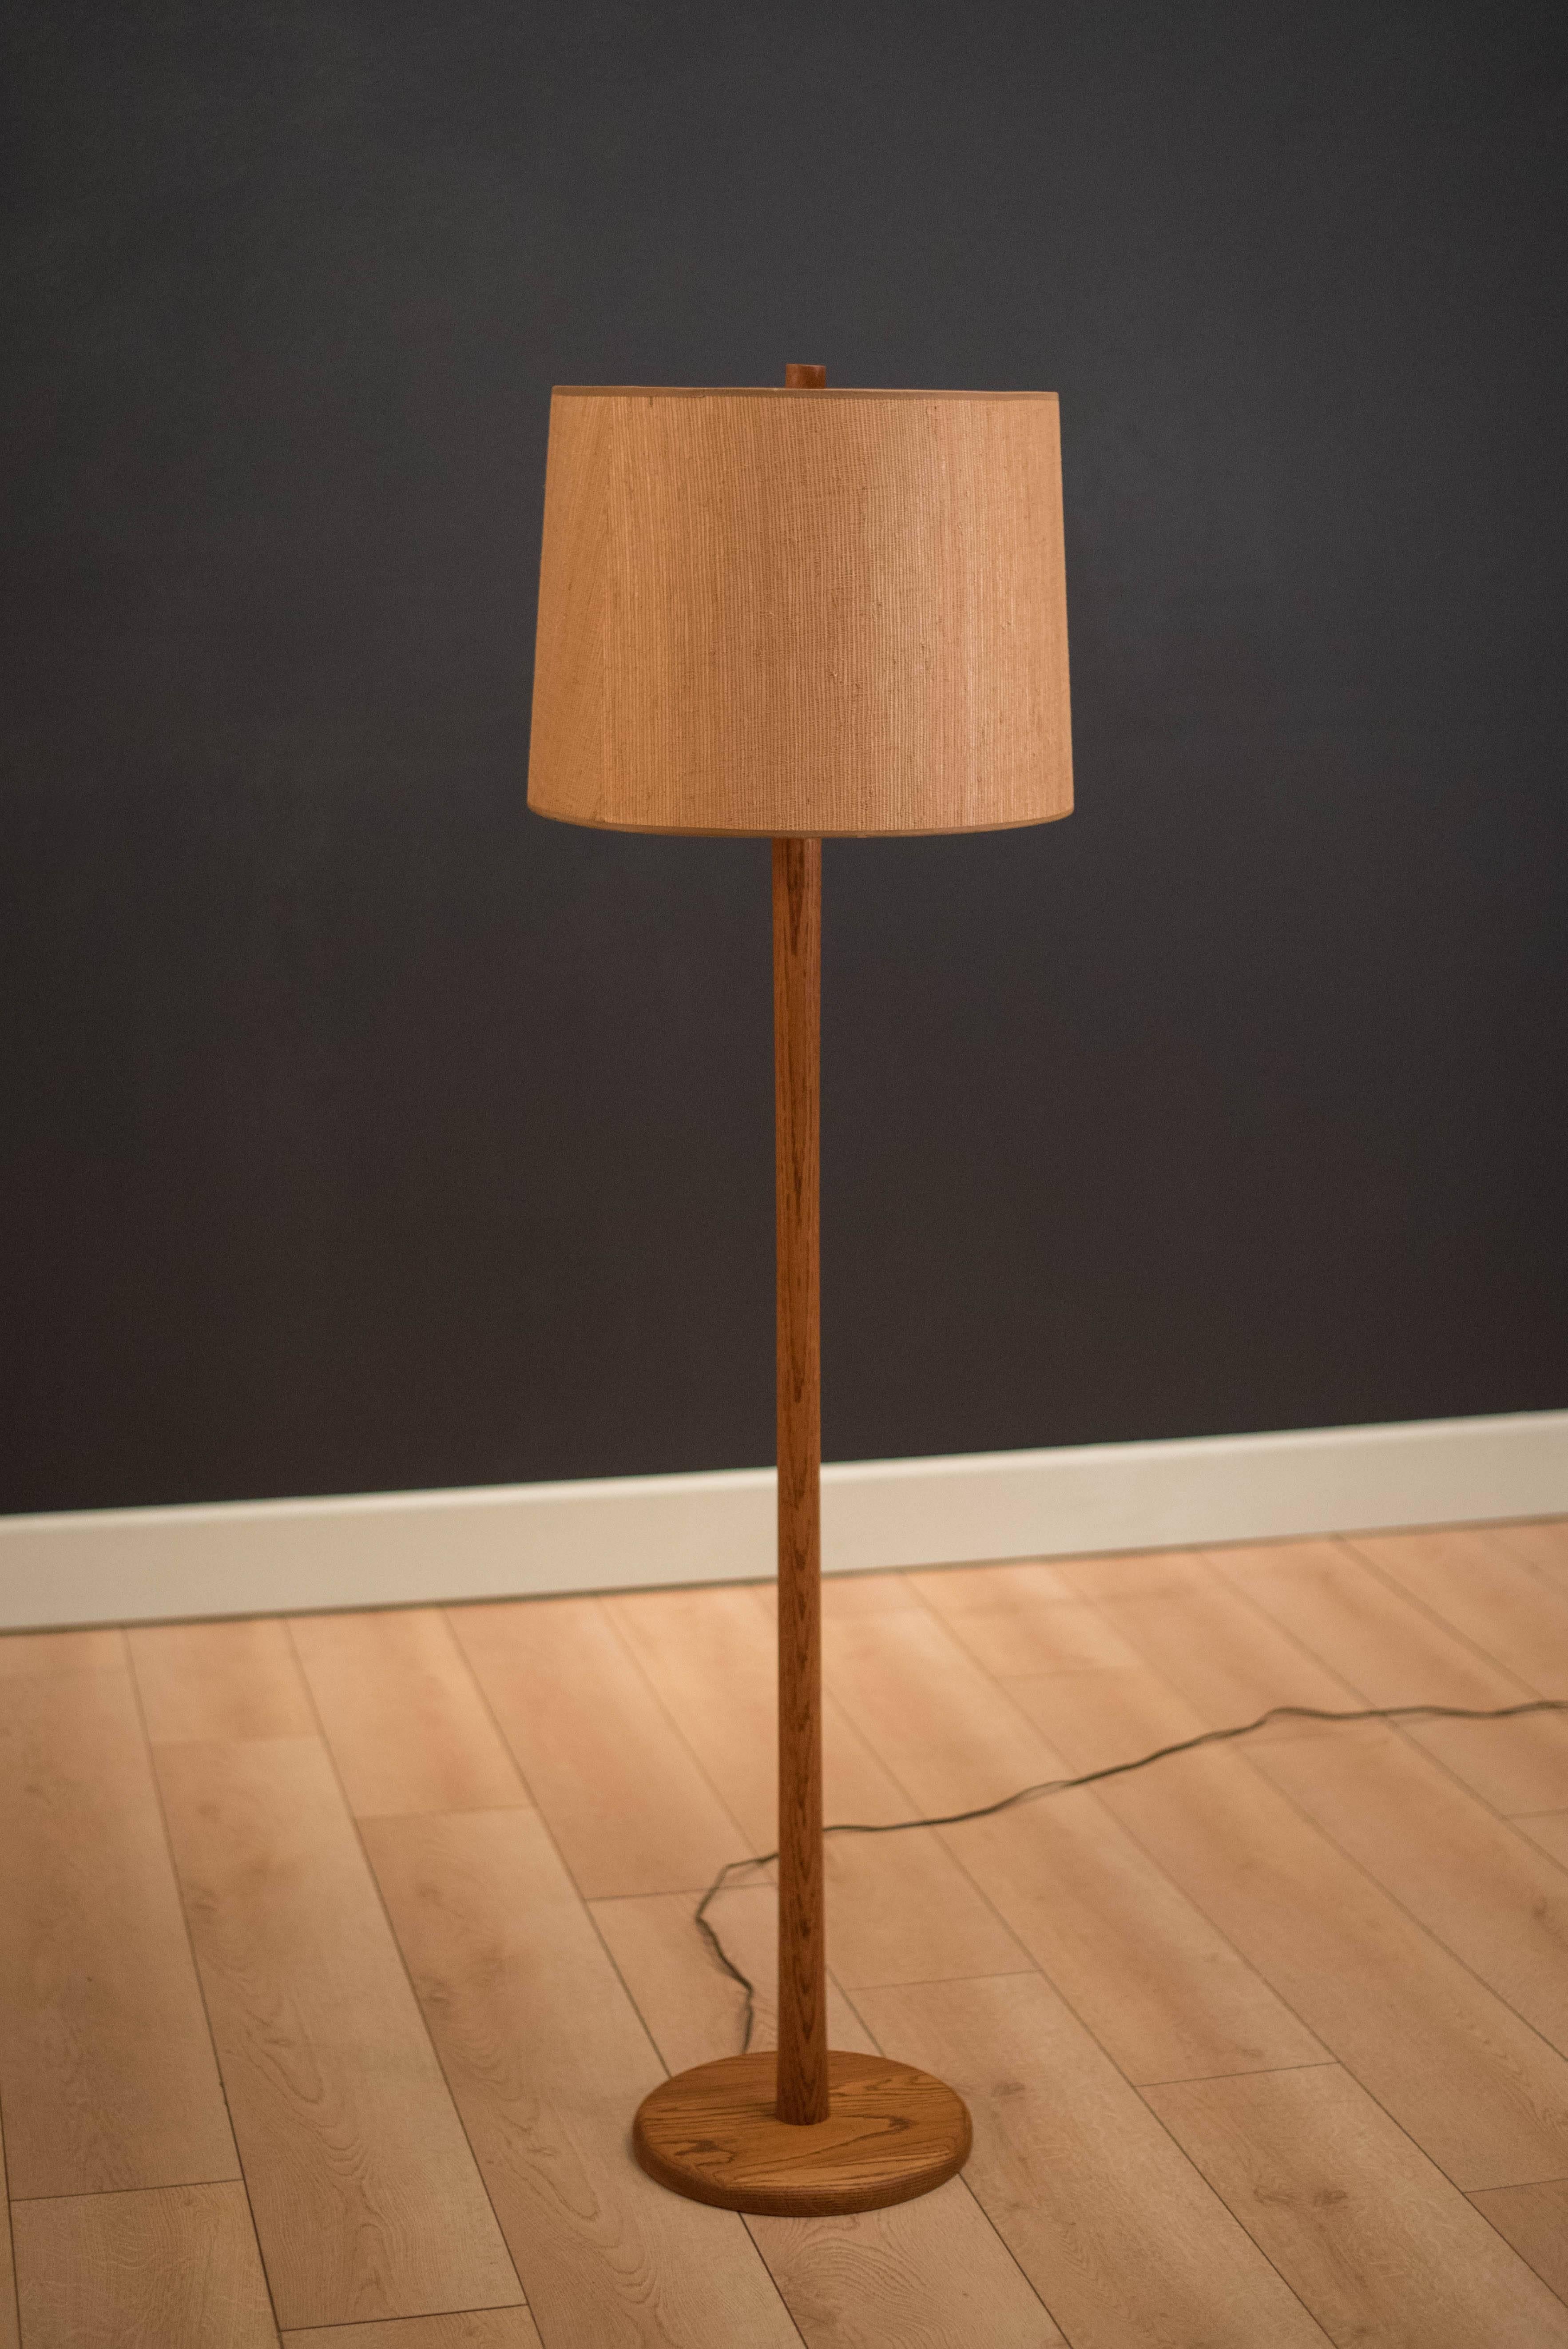 Mid century modern floor lamp in oak designed by Jane and Gordon Martz for Marshall Studios. Features a three-way switch and includes grasscloth drum shade and signature wood finial.